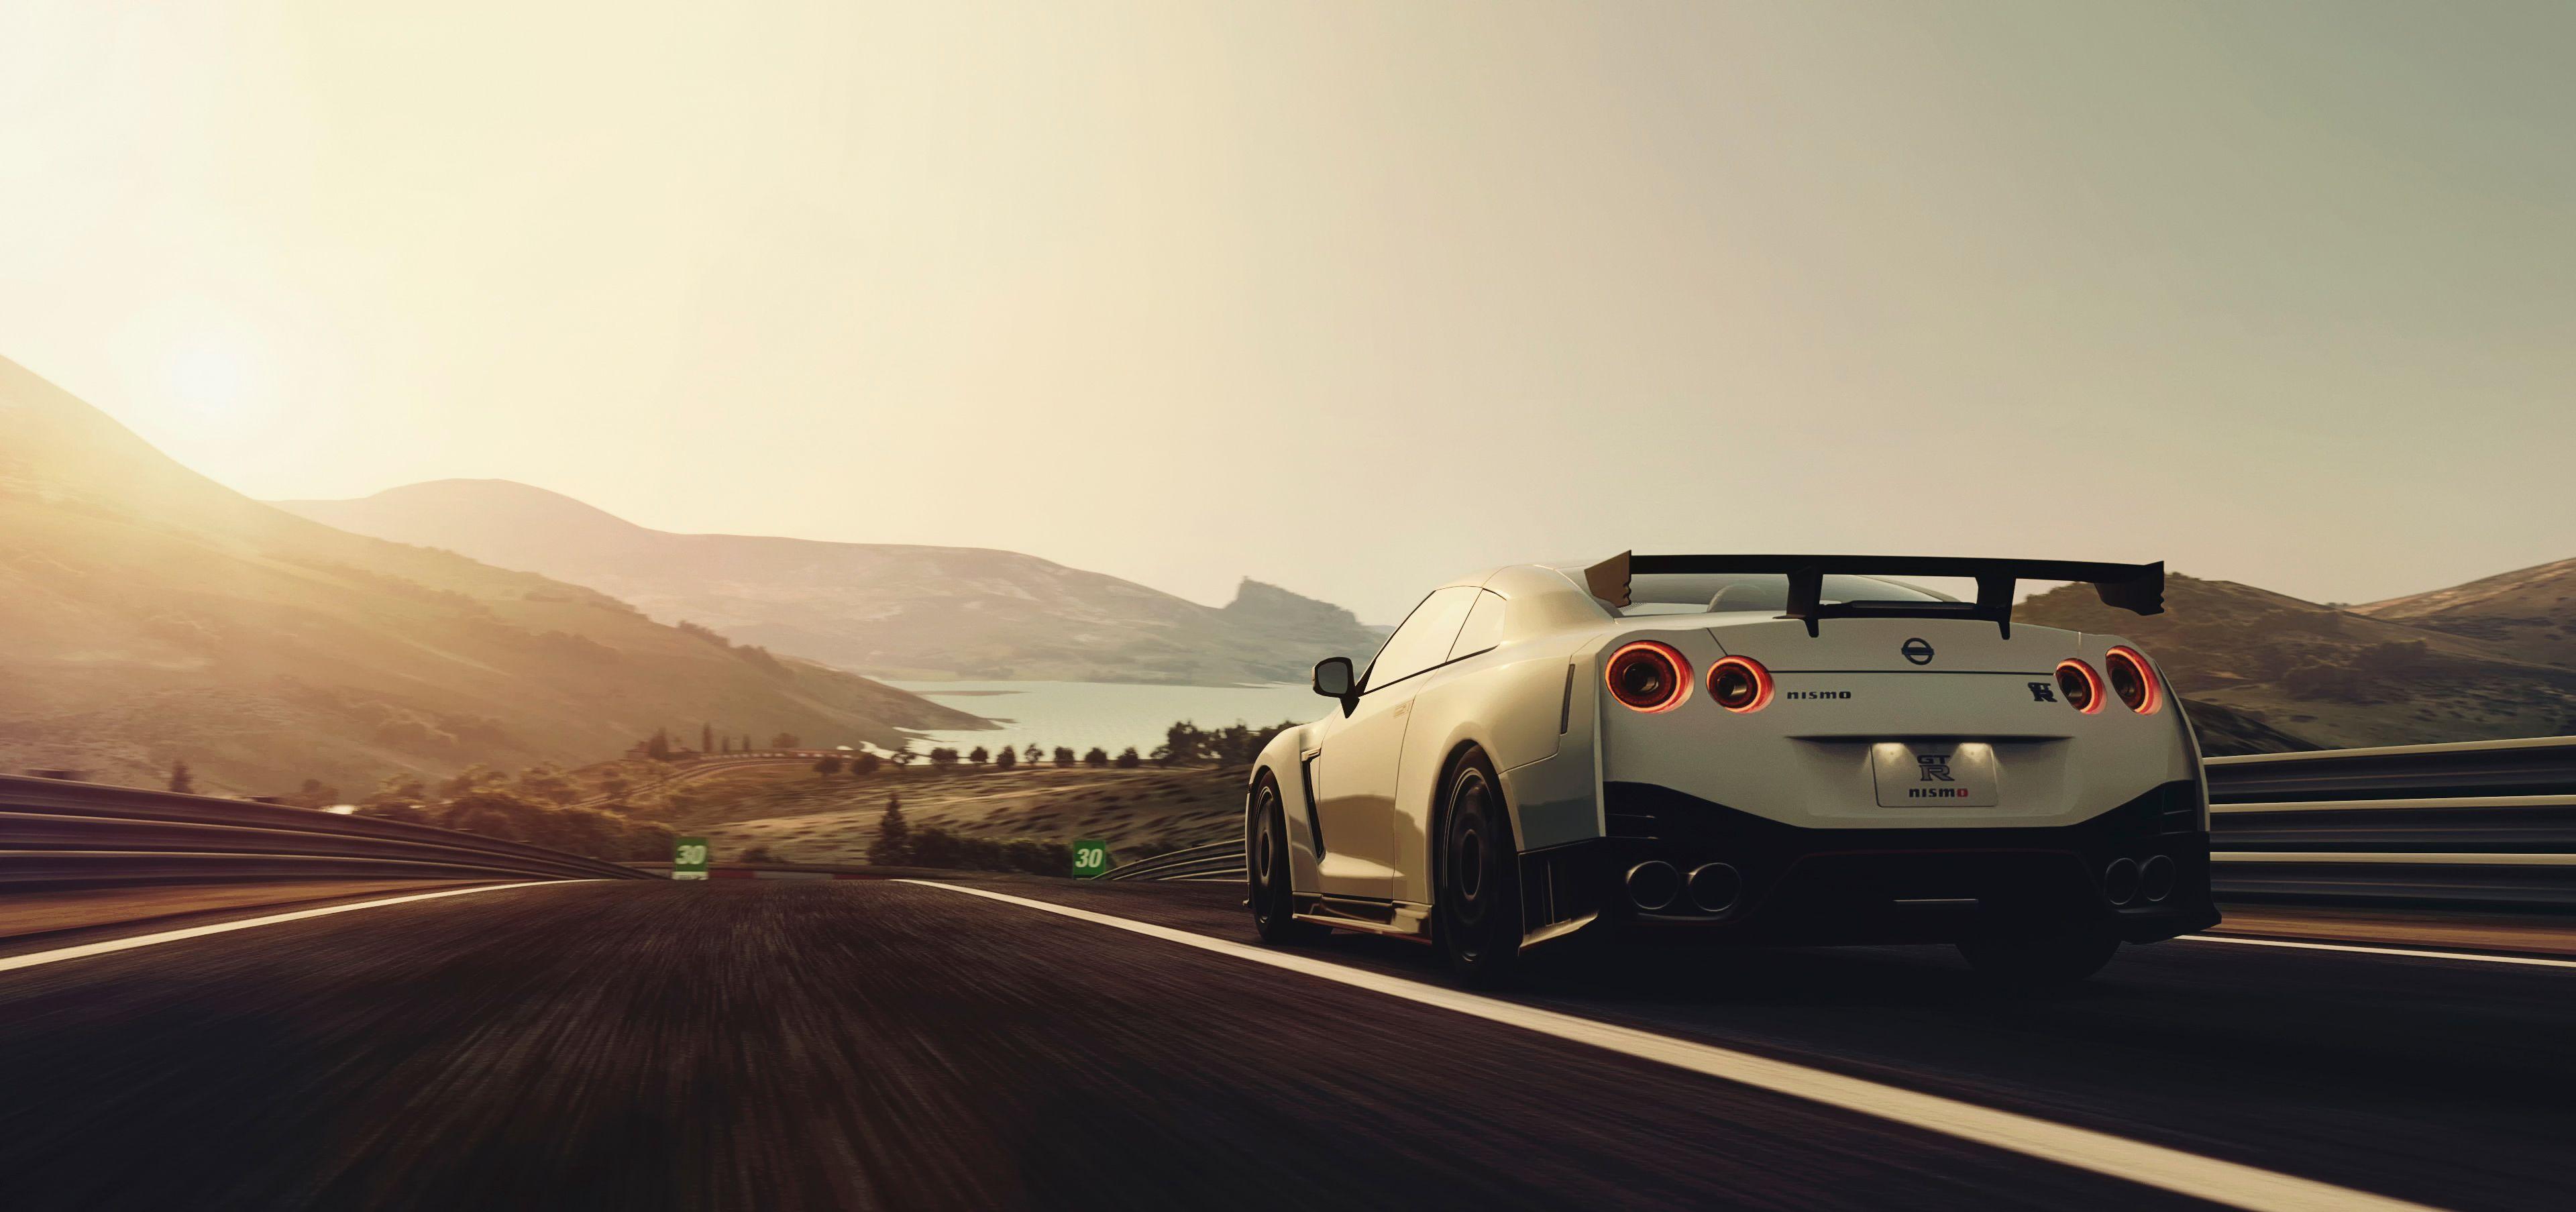 Nissan GT R Nismo HD Wallpaper And Background Image